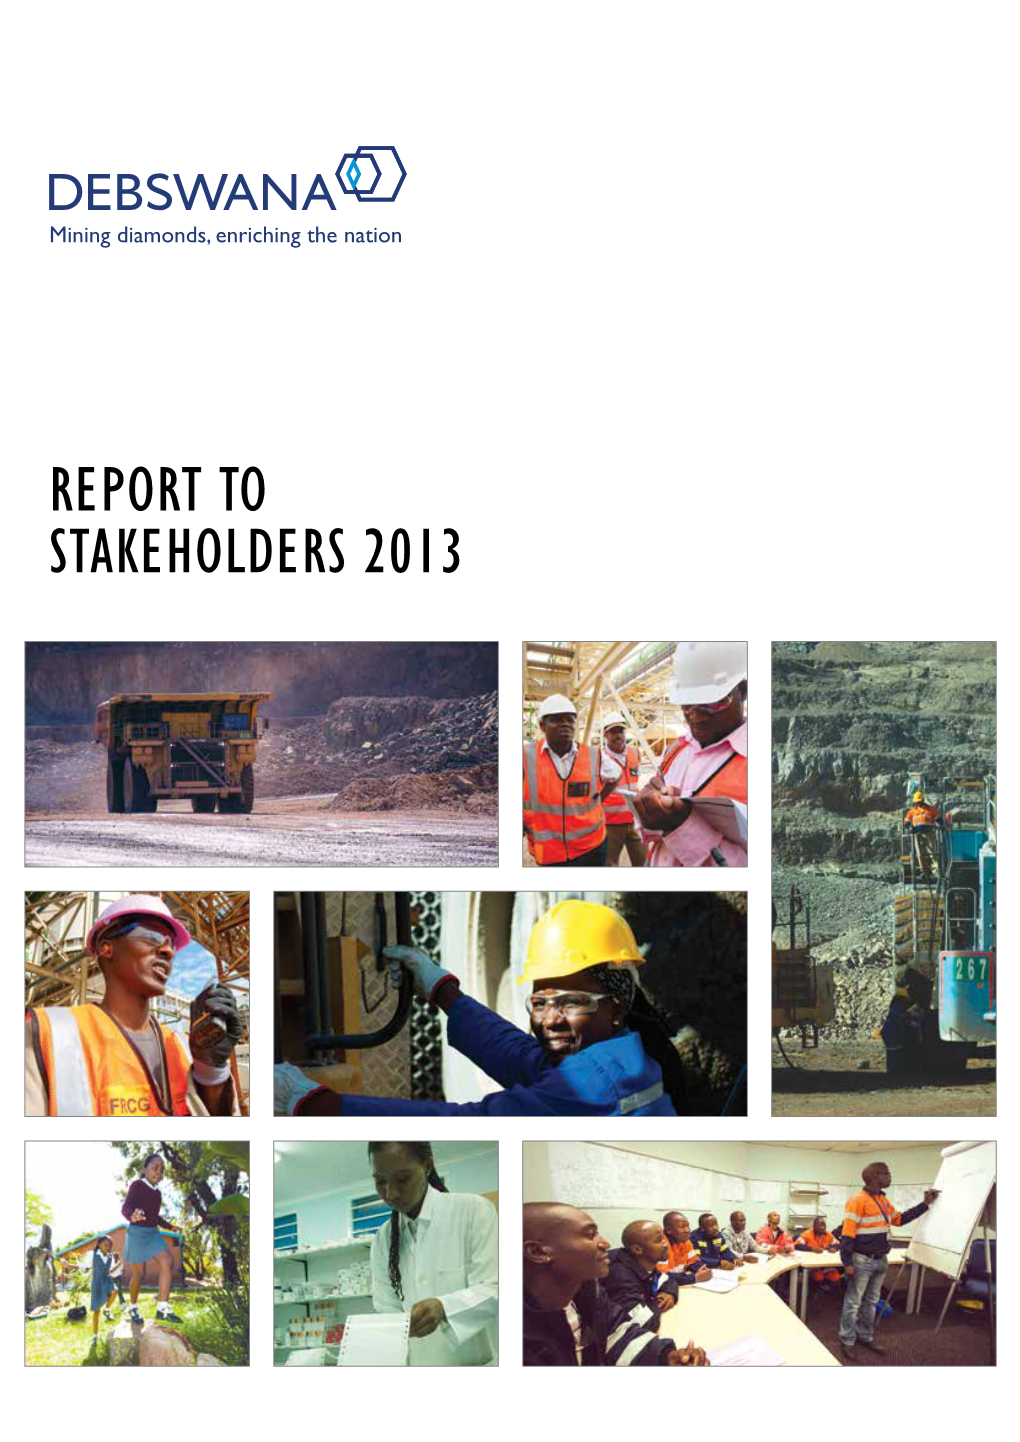 Report to Stakeholders 2013 Debswana - Report to Stakeholders 2013